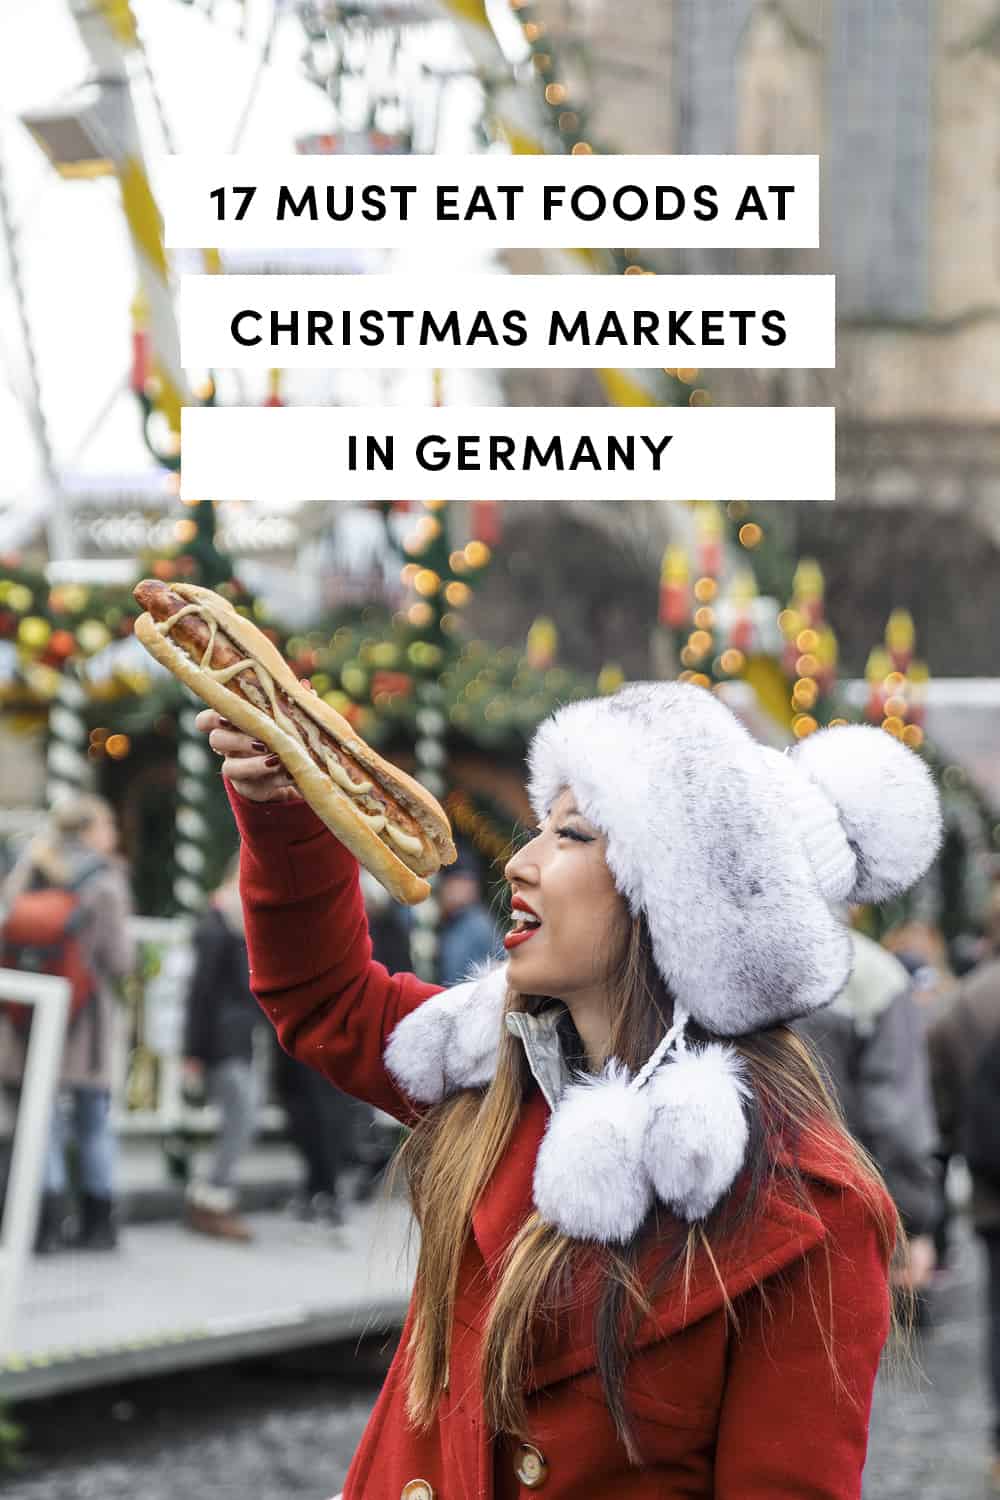 17 Must Eat Foods At Christmas Markets in Germany